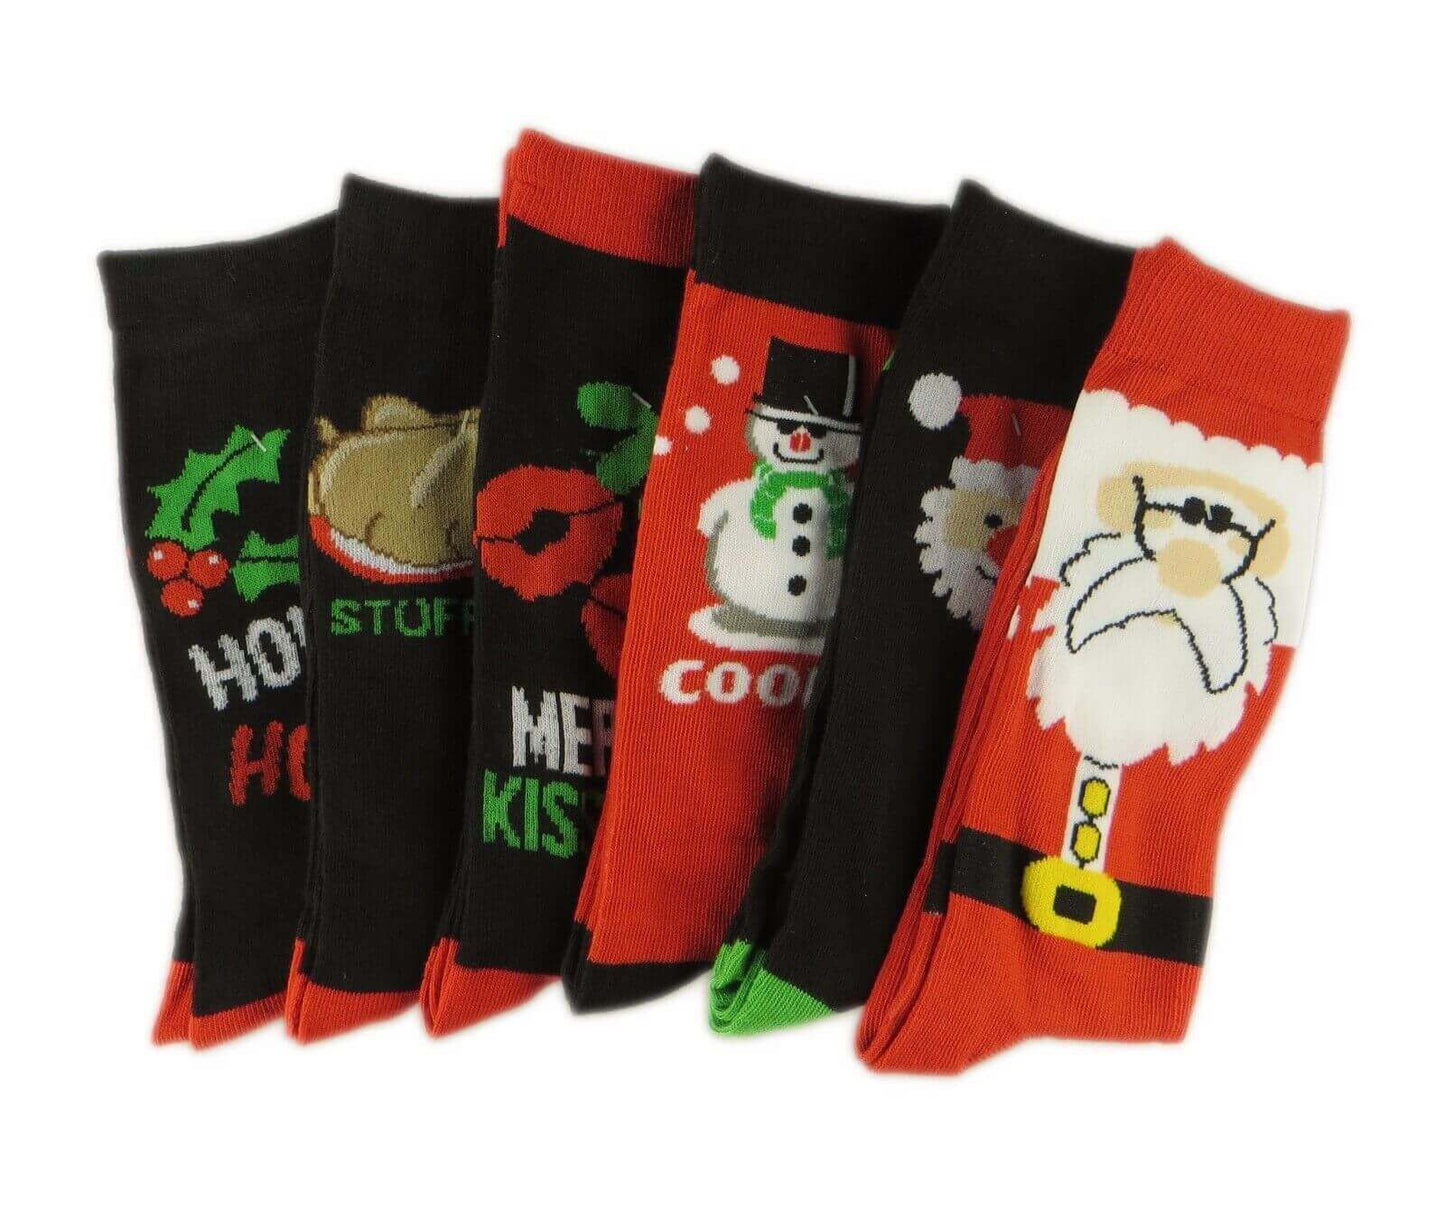 Pack Of 6 Men's Christmas Socks, Novelty Xmas Stocking Filler. Buy now for £6.00. A Socks by Sock Stack. 6-11, animal, assorted, black, boys, breathable, christmas, comfortable, cosy, father christmas, festive, mens, mens socks, novelty, outdoor, red, rei